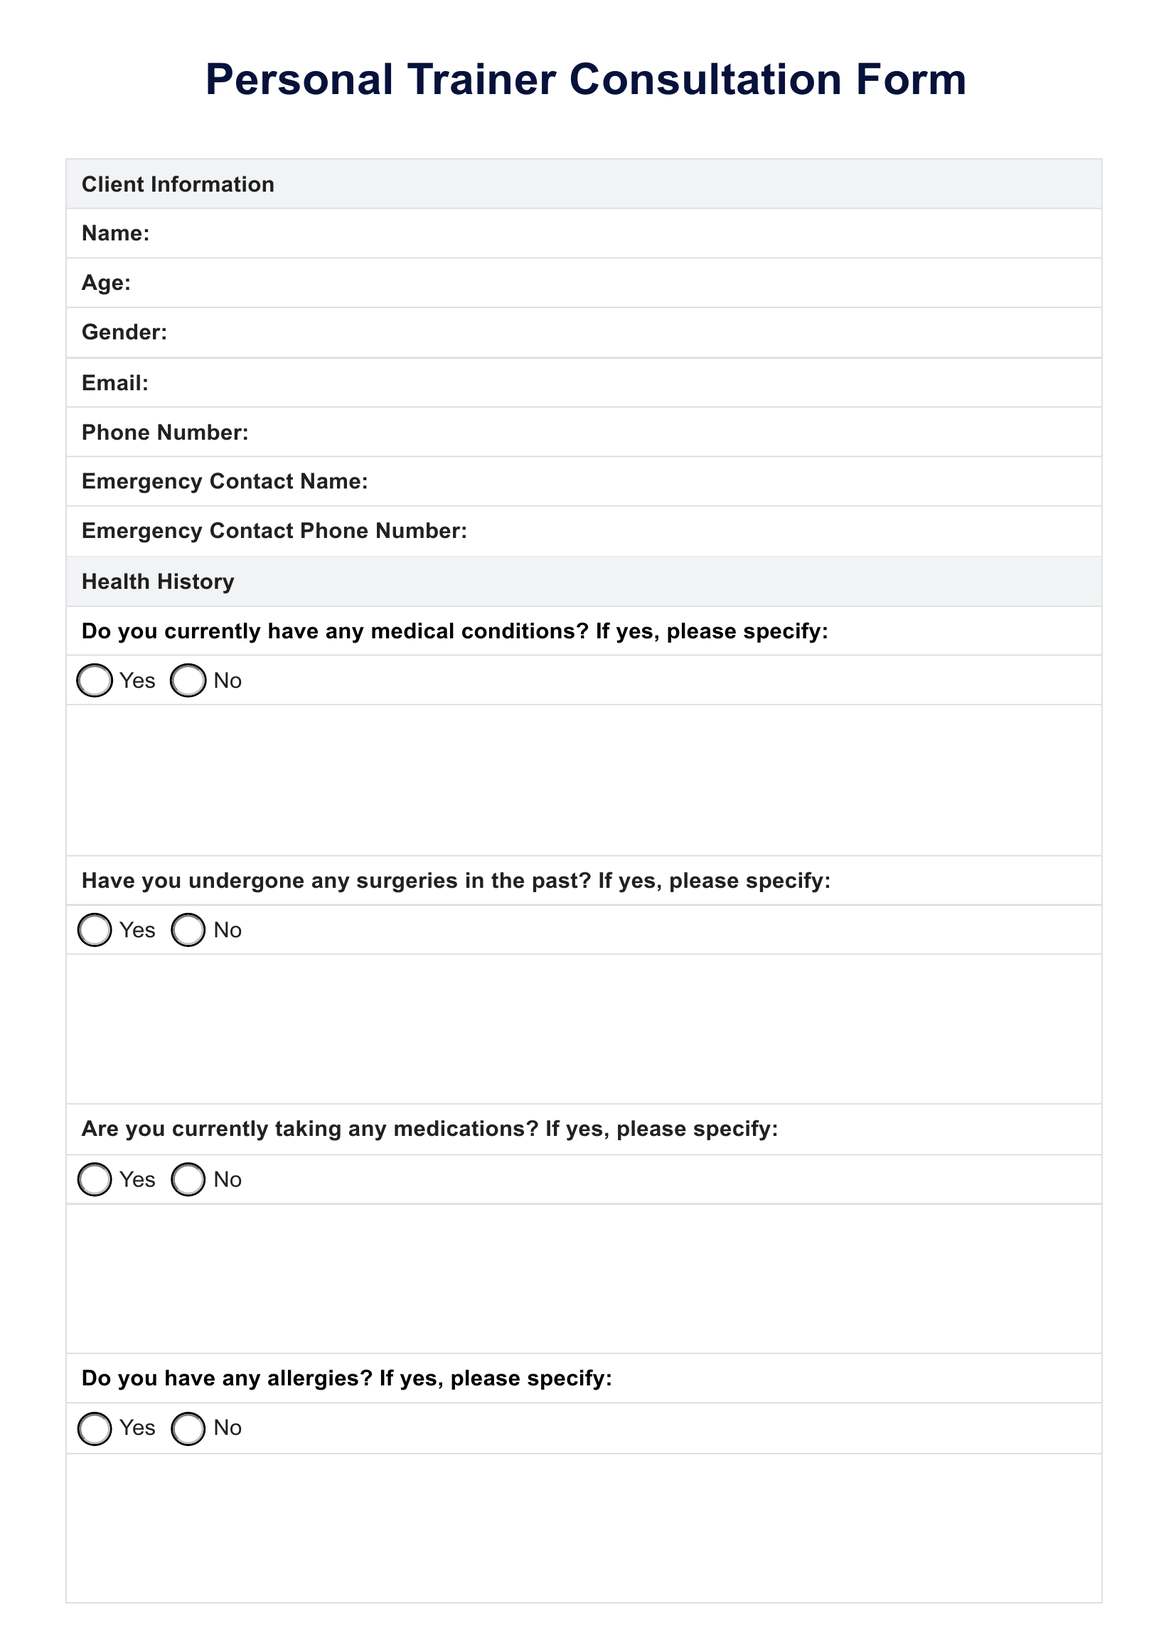 Personal Trainer Consultation Form PDF Example